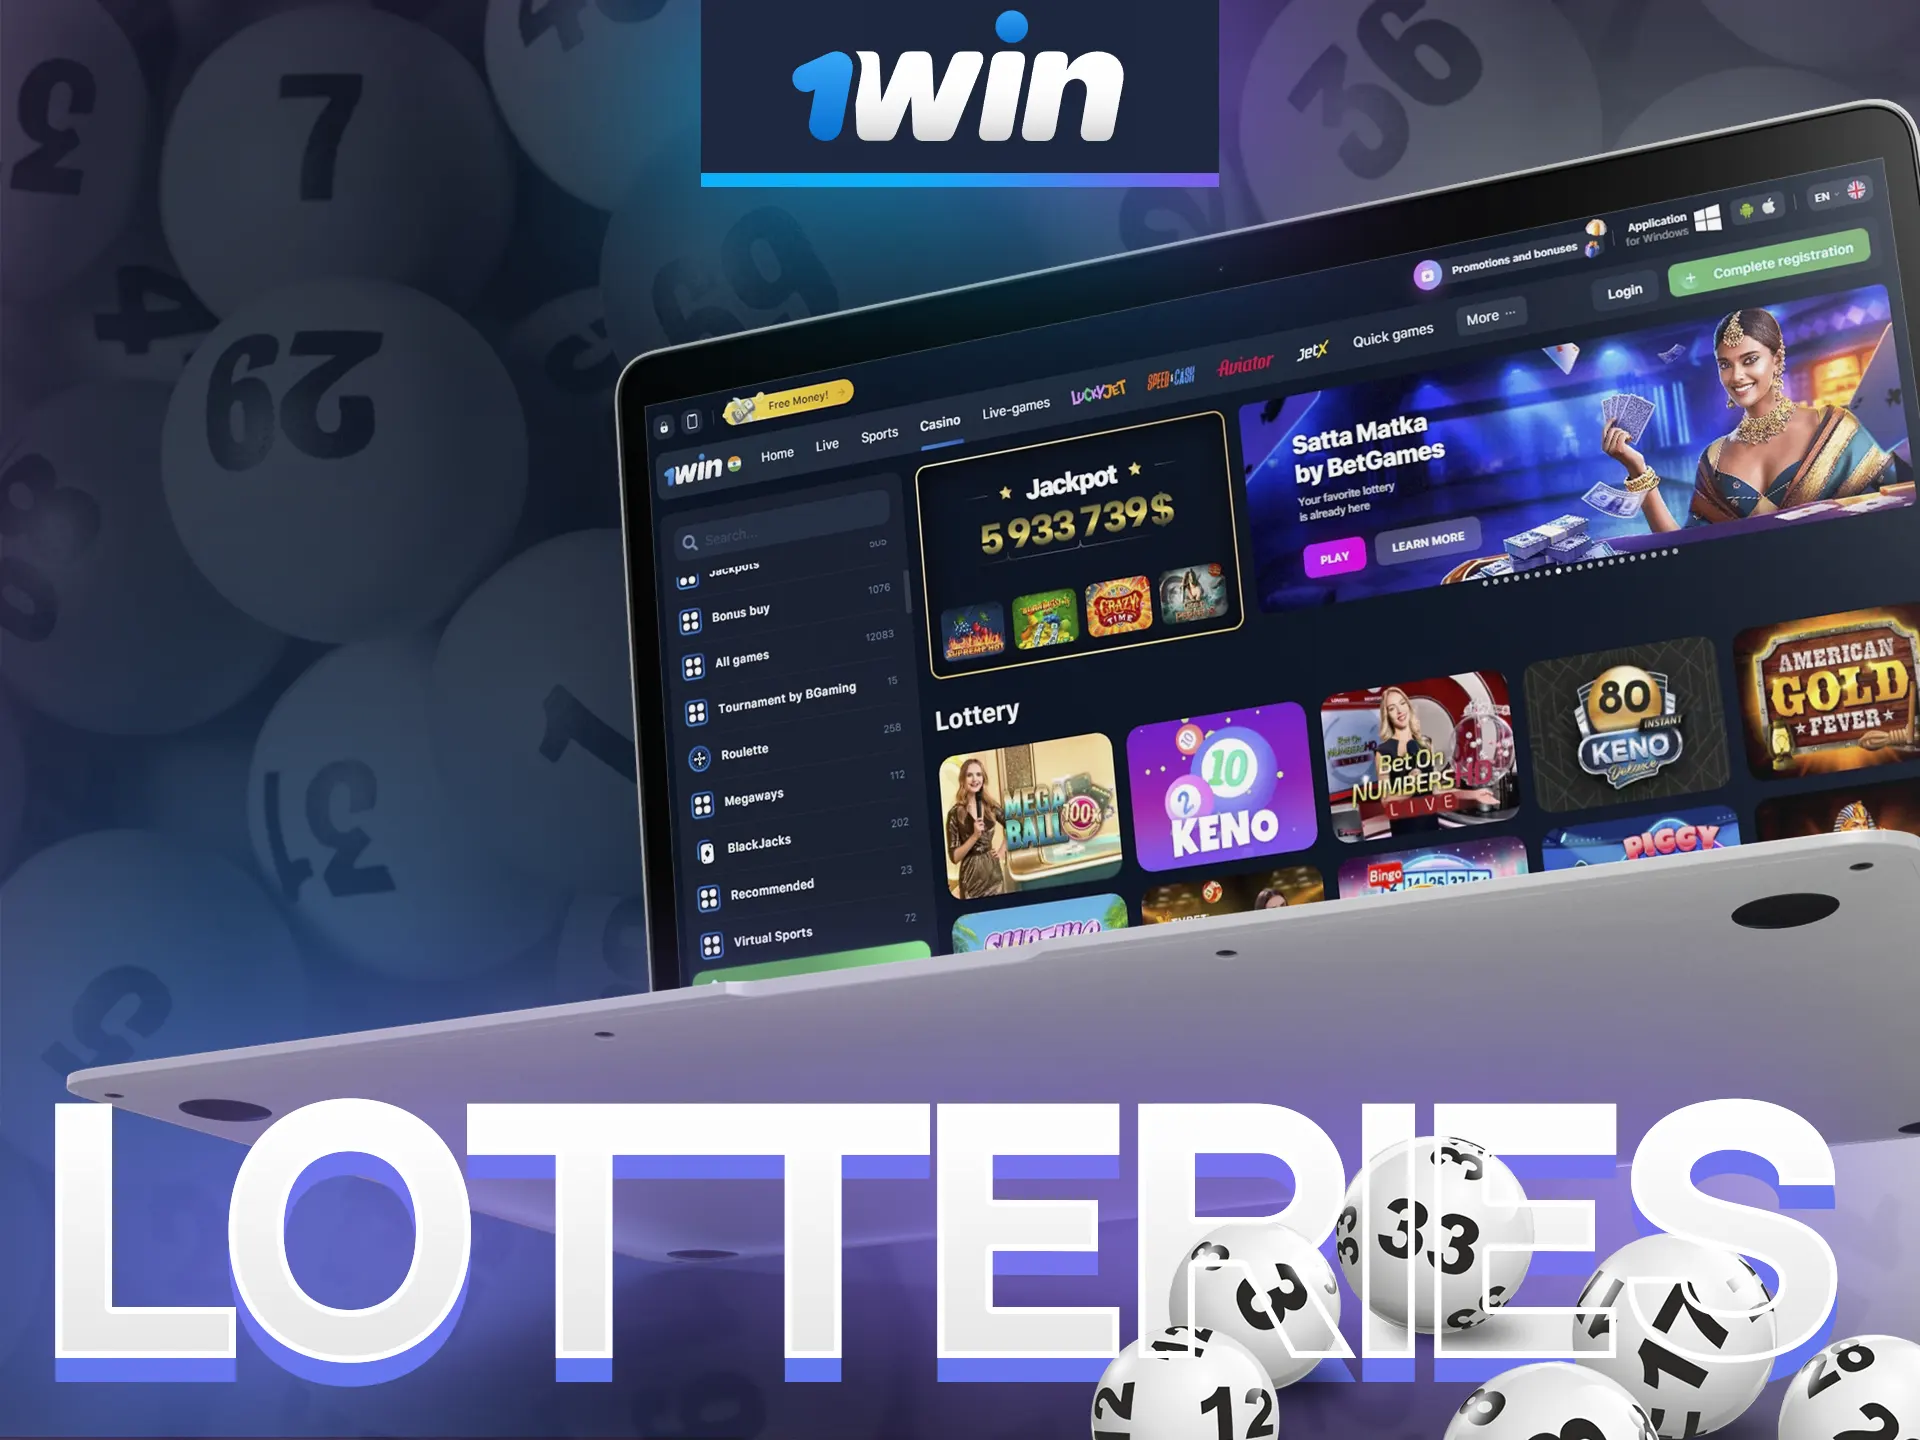 Try your luck at 1Win Lotteries.